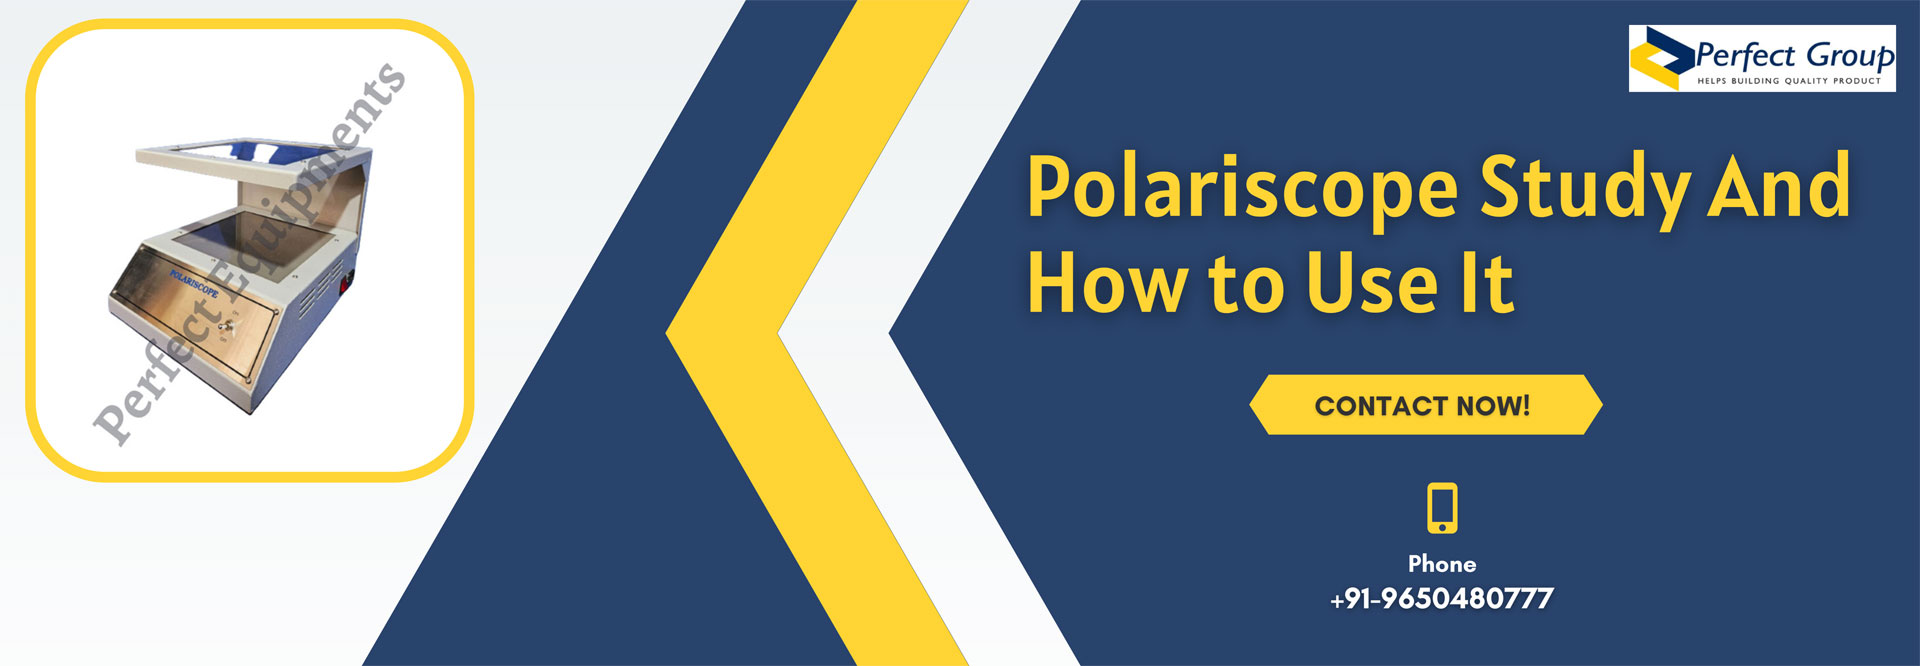 Polariscope Study And How to Use It